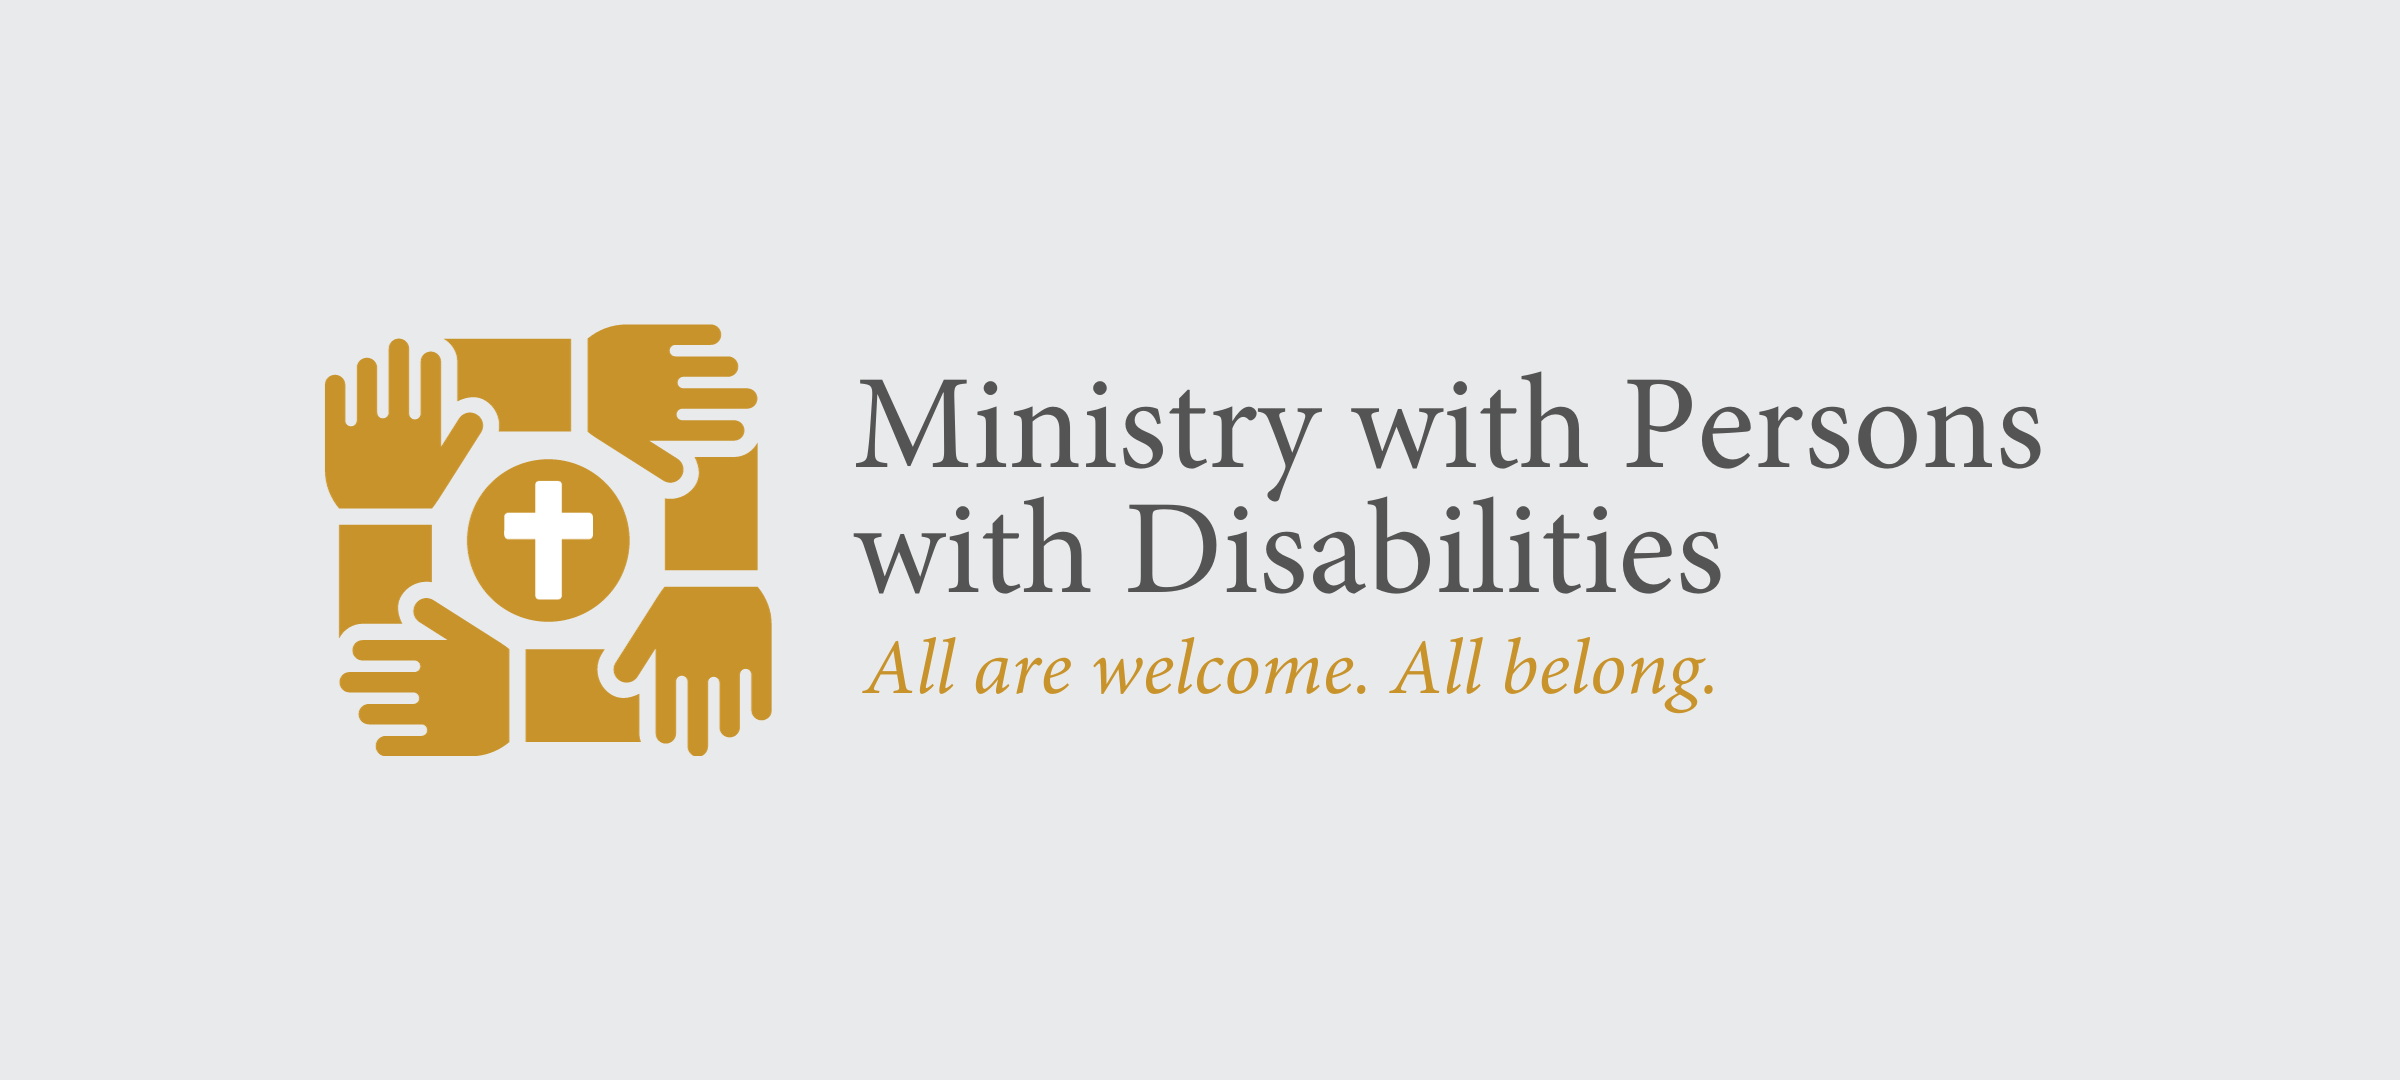 Ministry with Persons with Disabilities